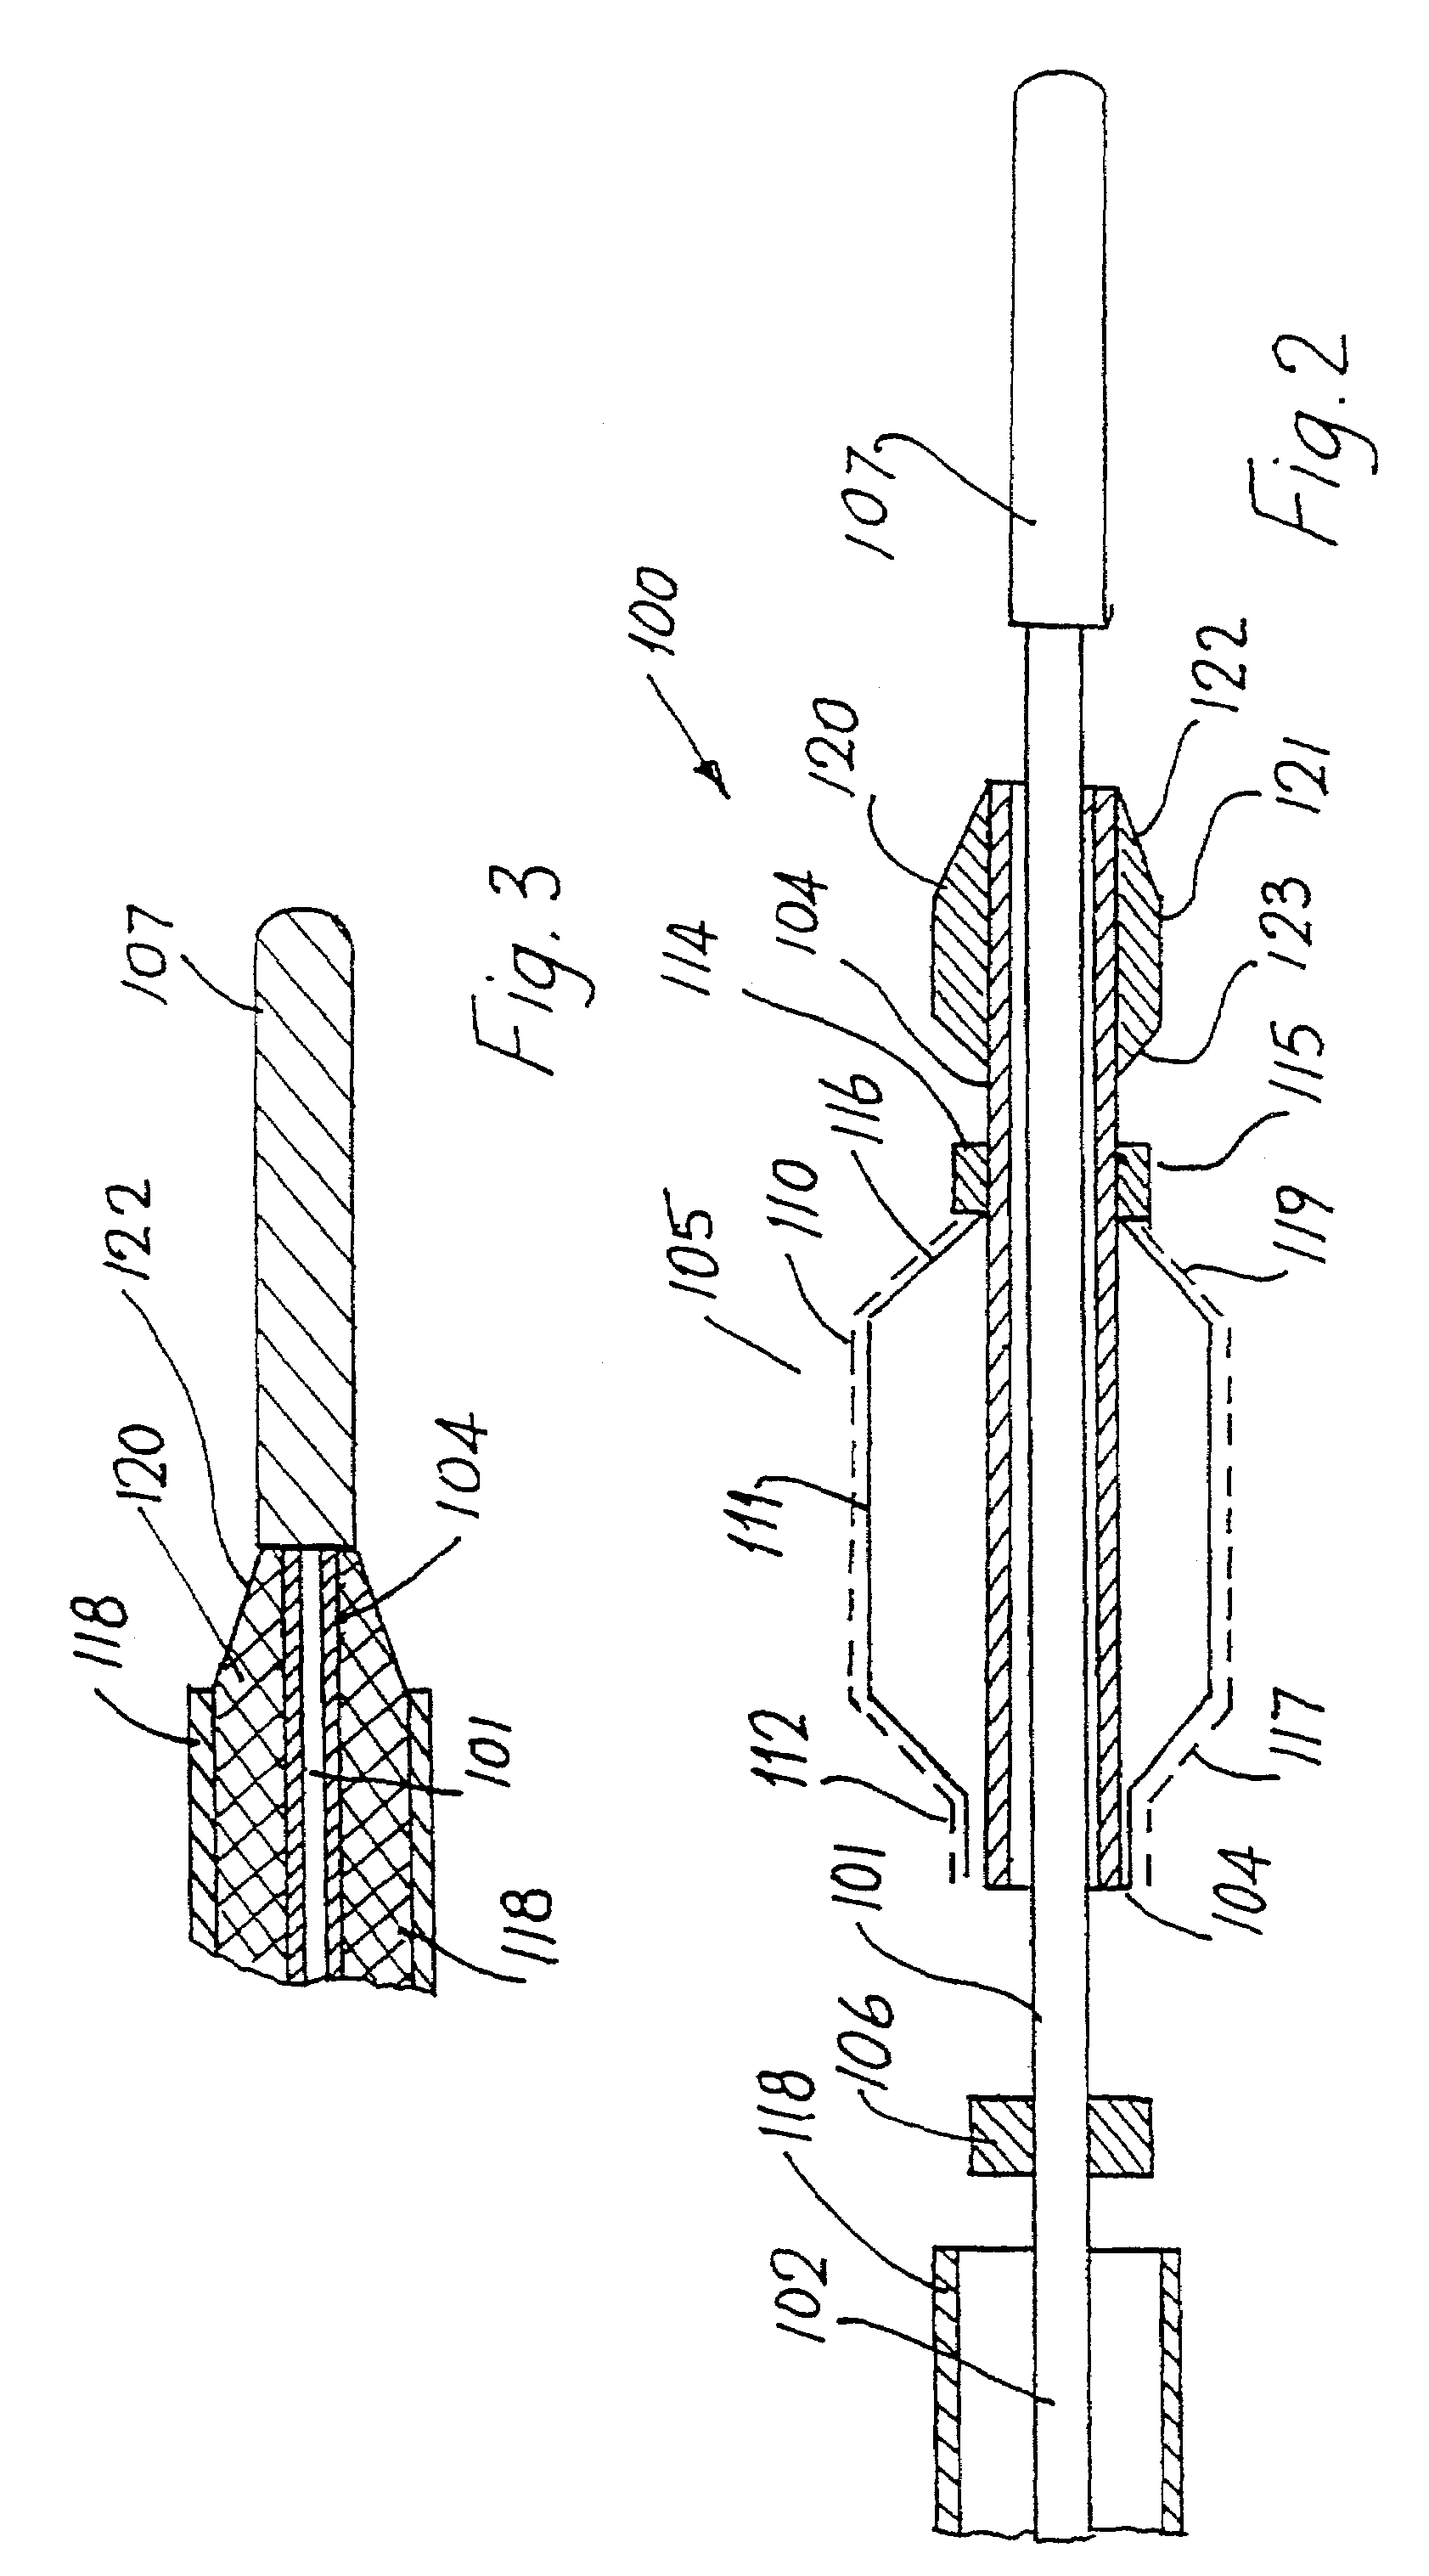 Filter element for embolic protection device